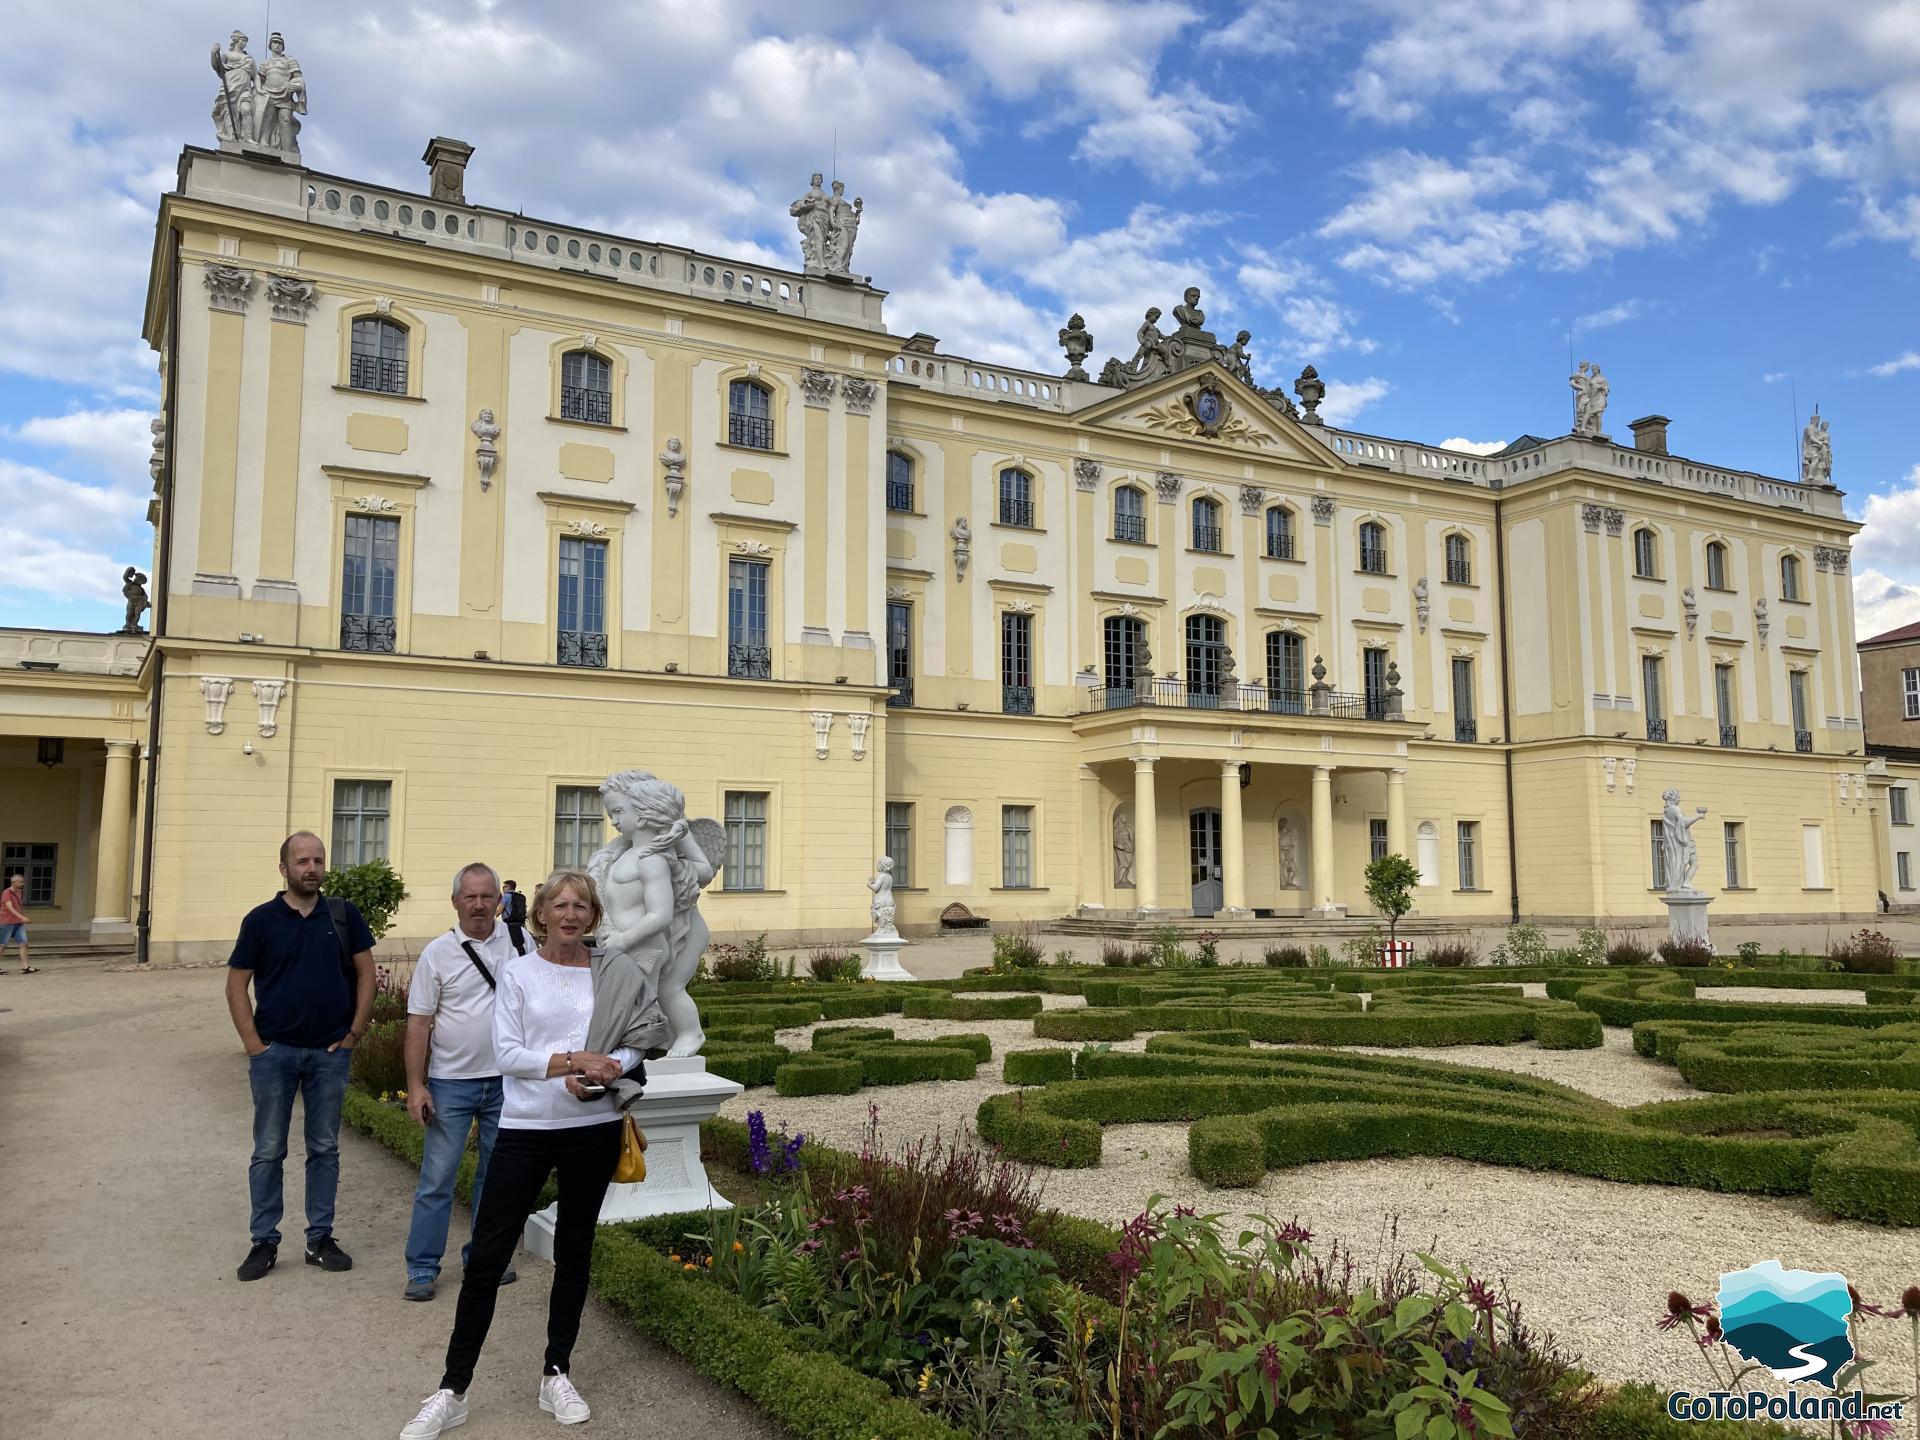 two men and a woman are standing in front of the palace, they are in the garden